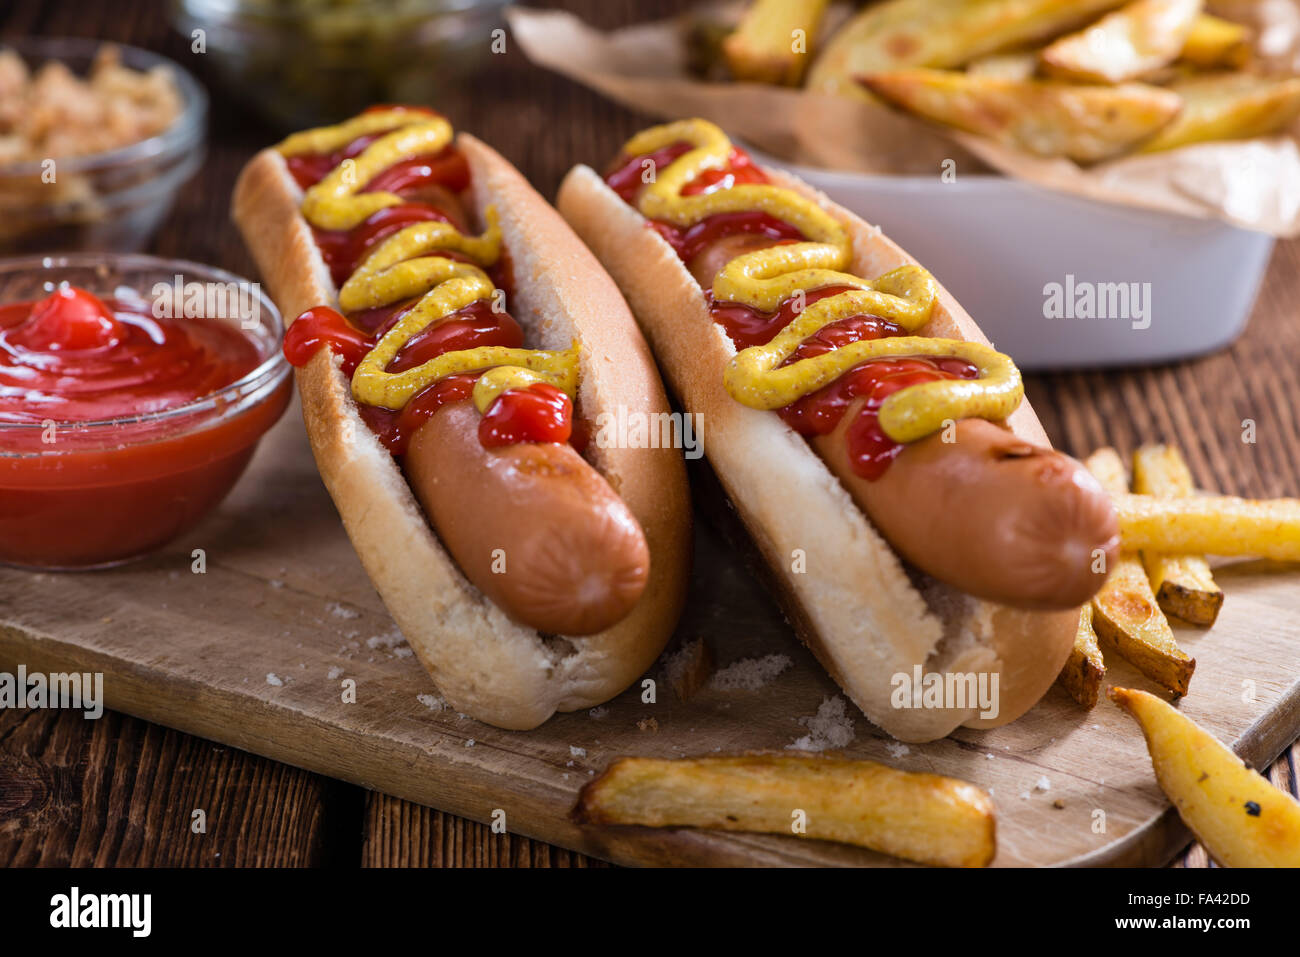 Homemade Hot Dog with ketchup and mustard on rustic wooden background Stock Photo